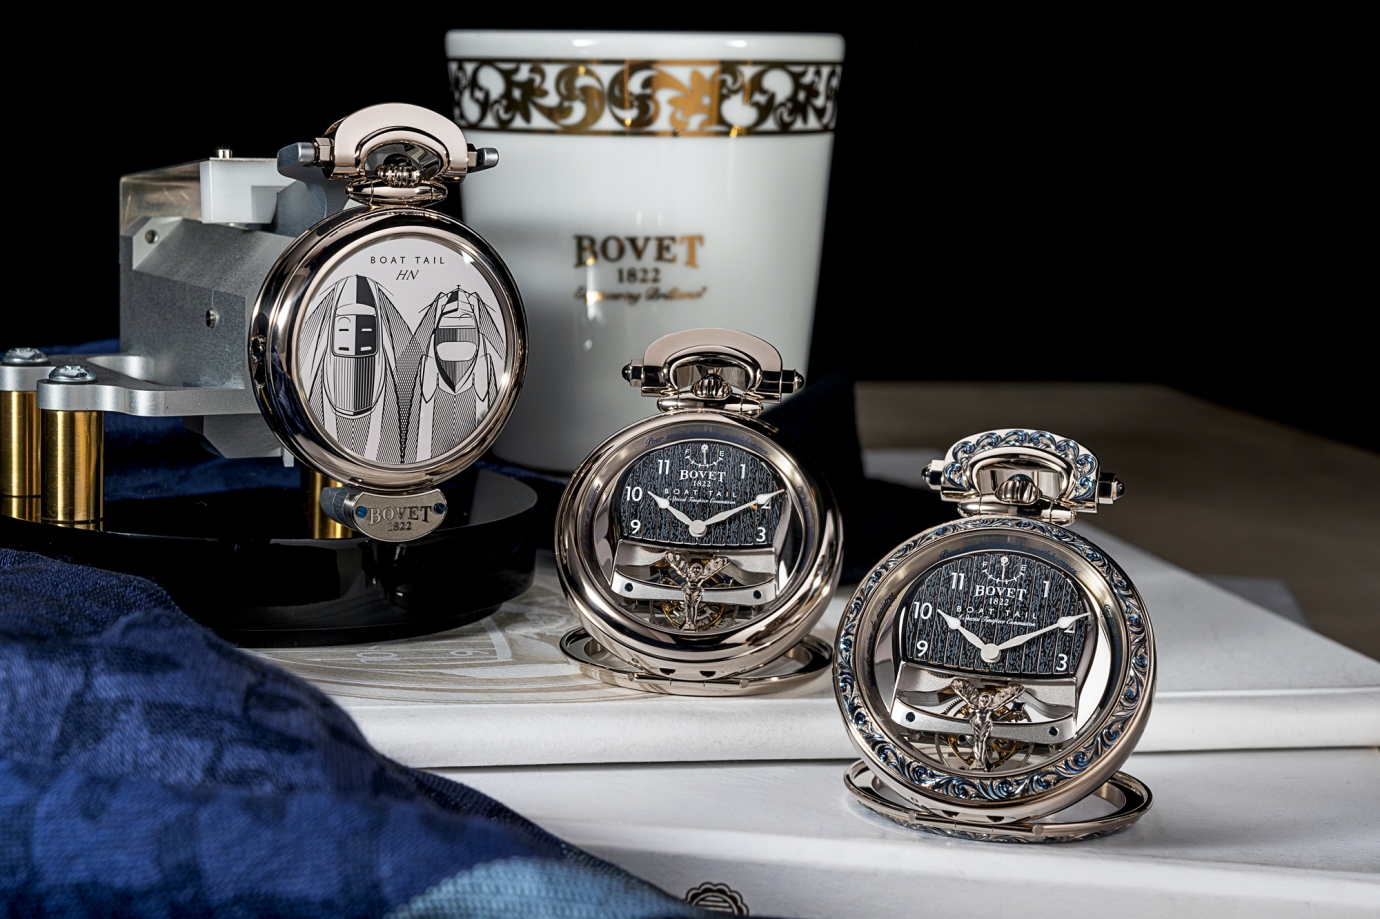 His/Hers timepieces fit perfectly into a bespoke Bovet mount in the Rolls-Royce Boat Tail's dash fascia